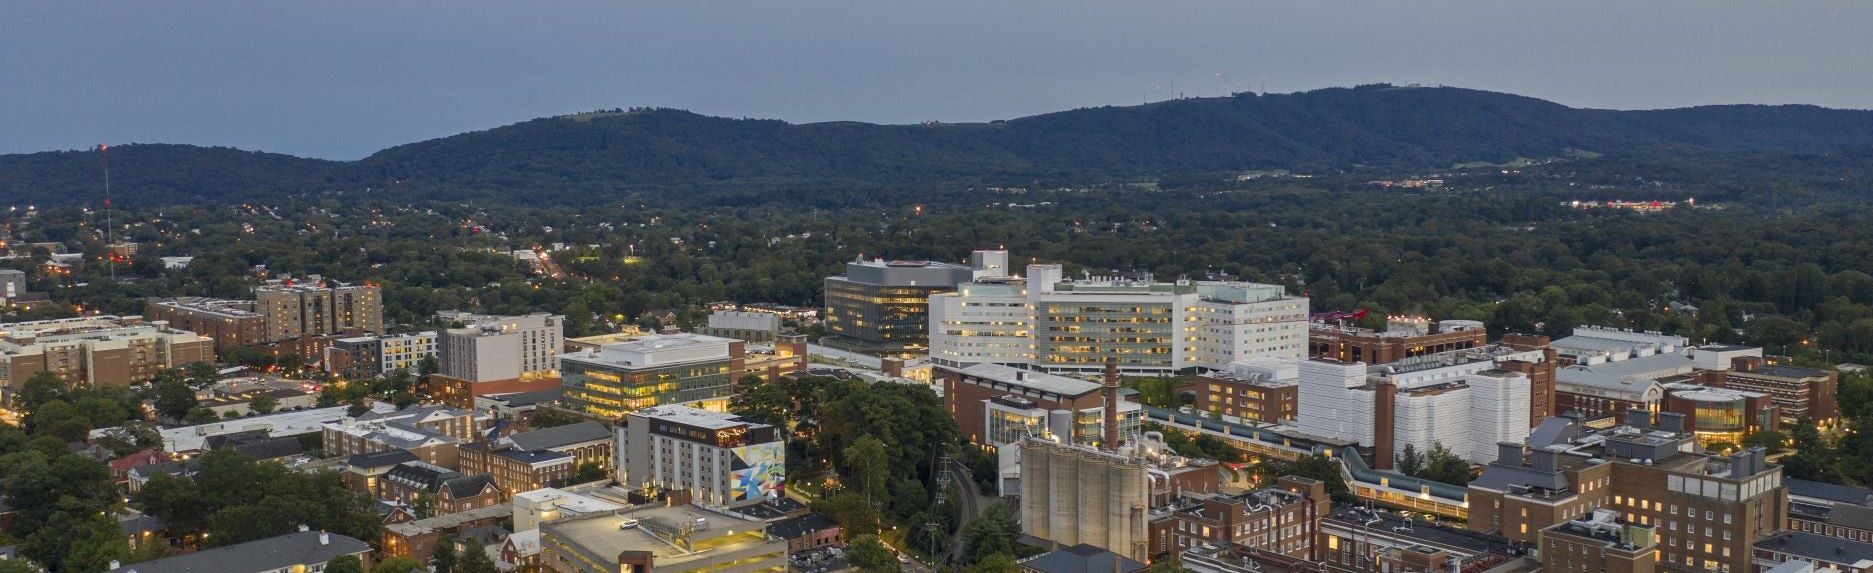 University of Virginia Medical System Aerial View at dusk